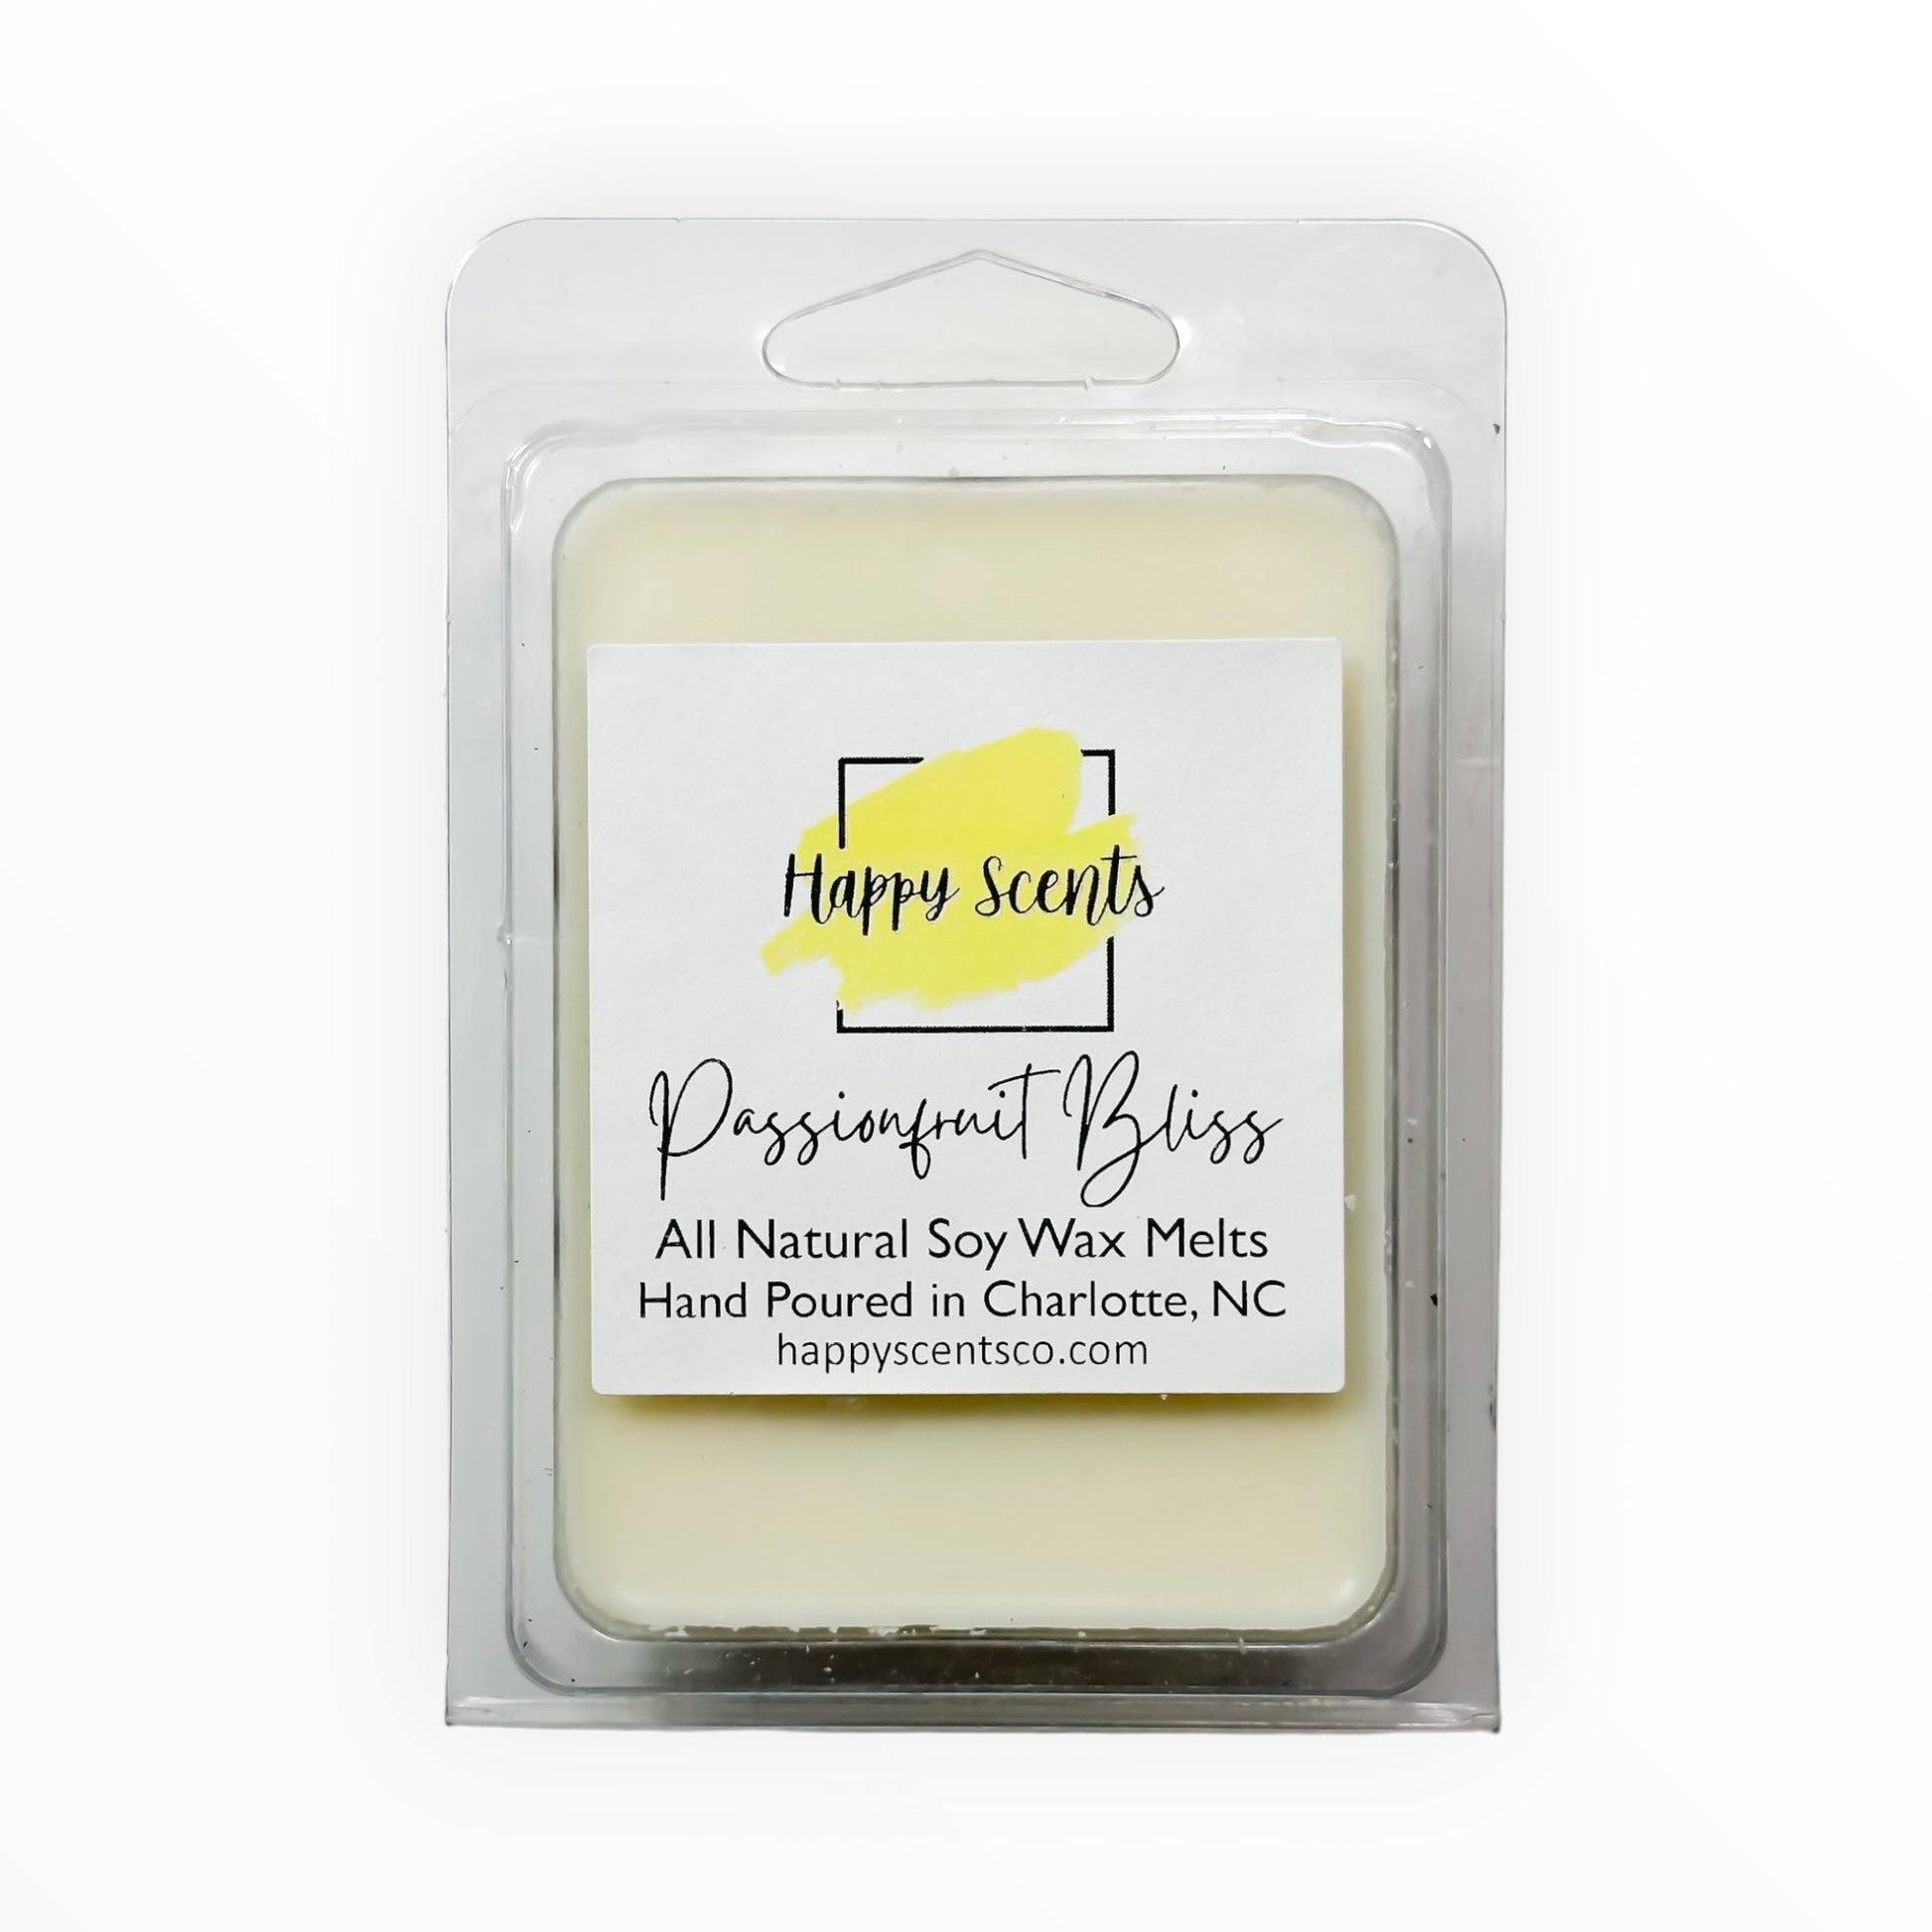 Passionfruit Bliss soy wax melt. 